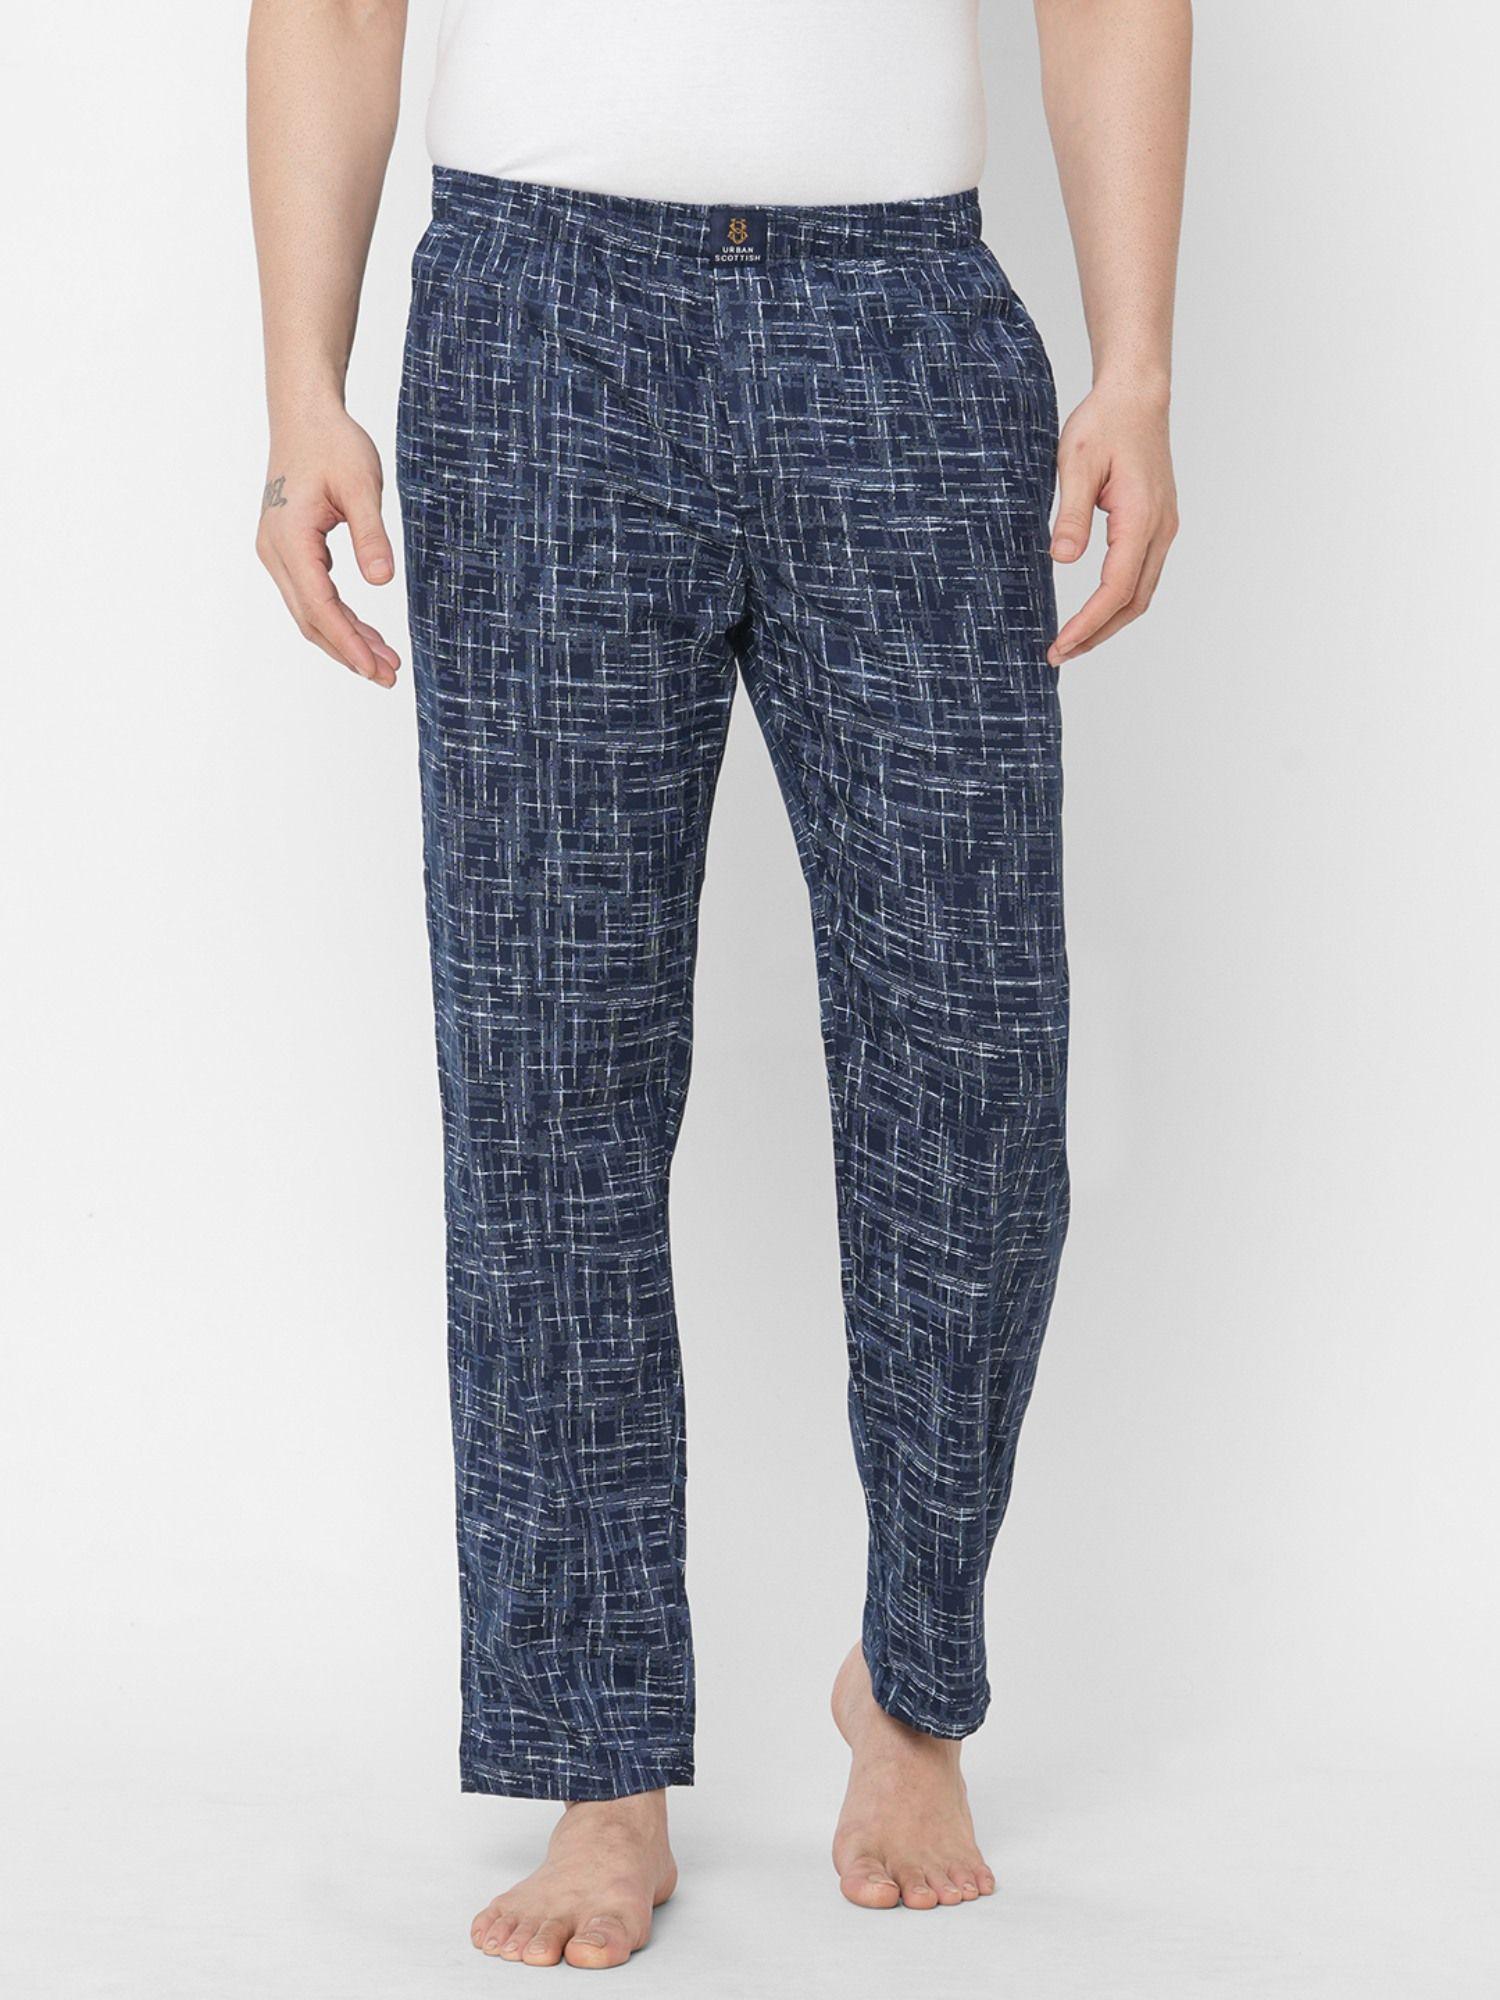 mens printed woven cotton super soft & breathable pyjama with pockets navy blue